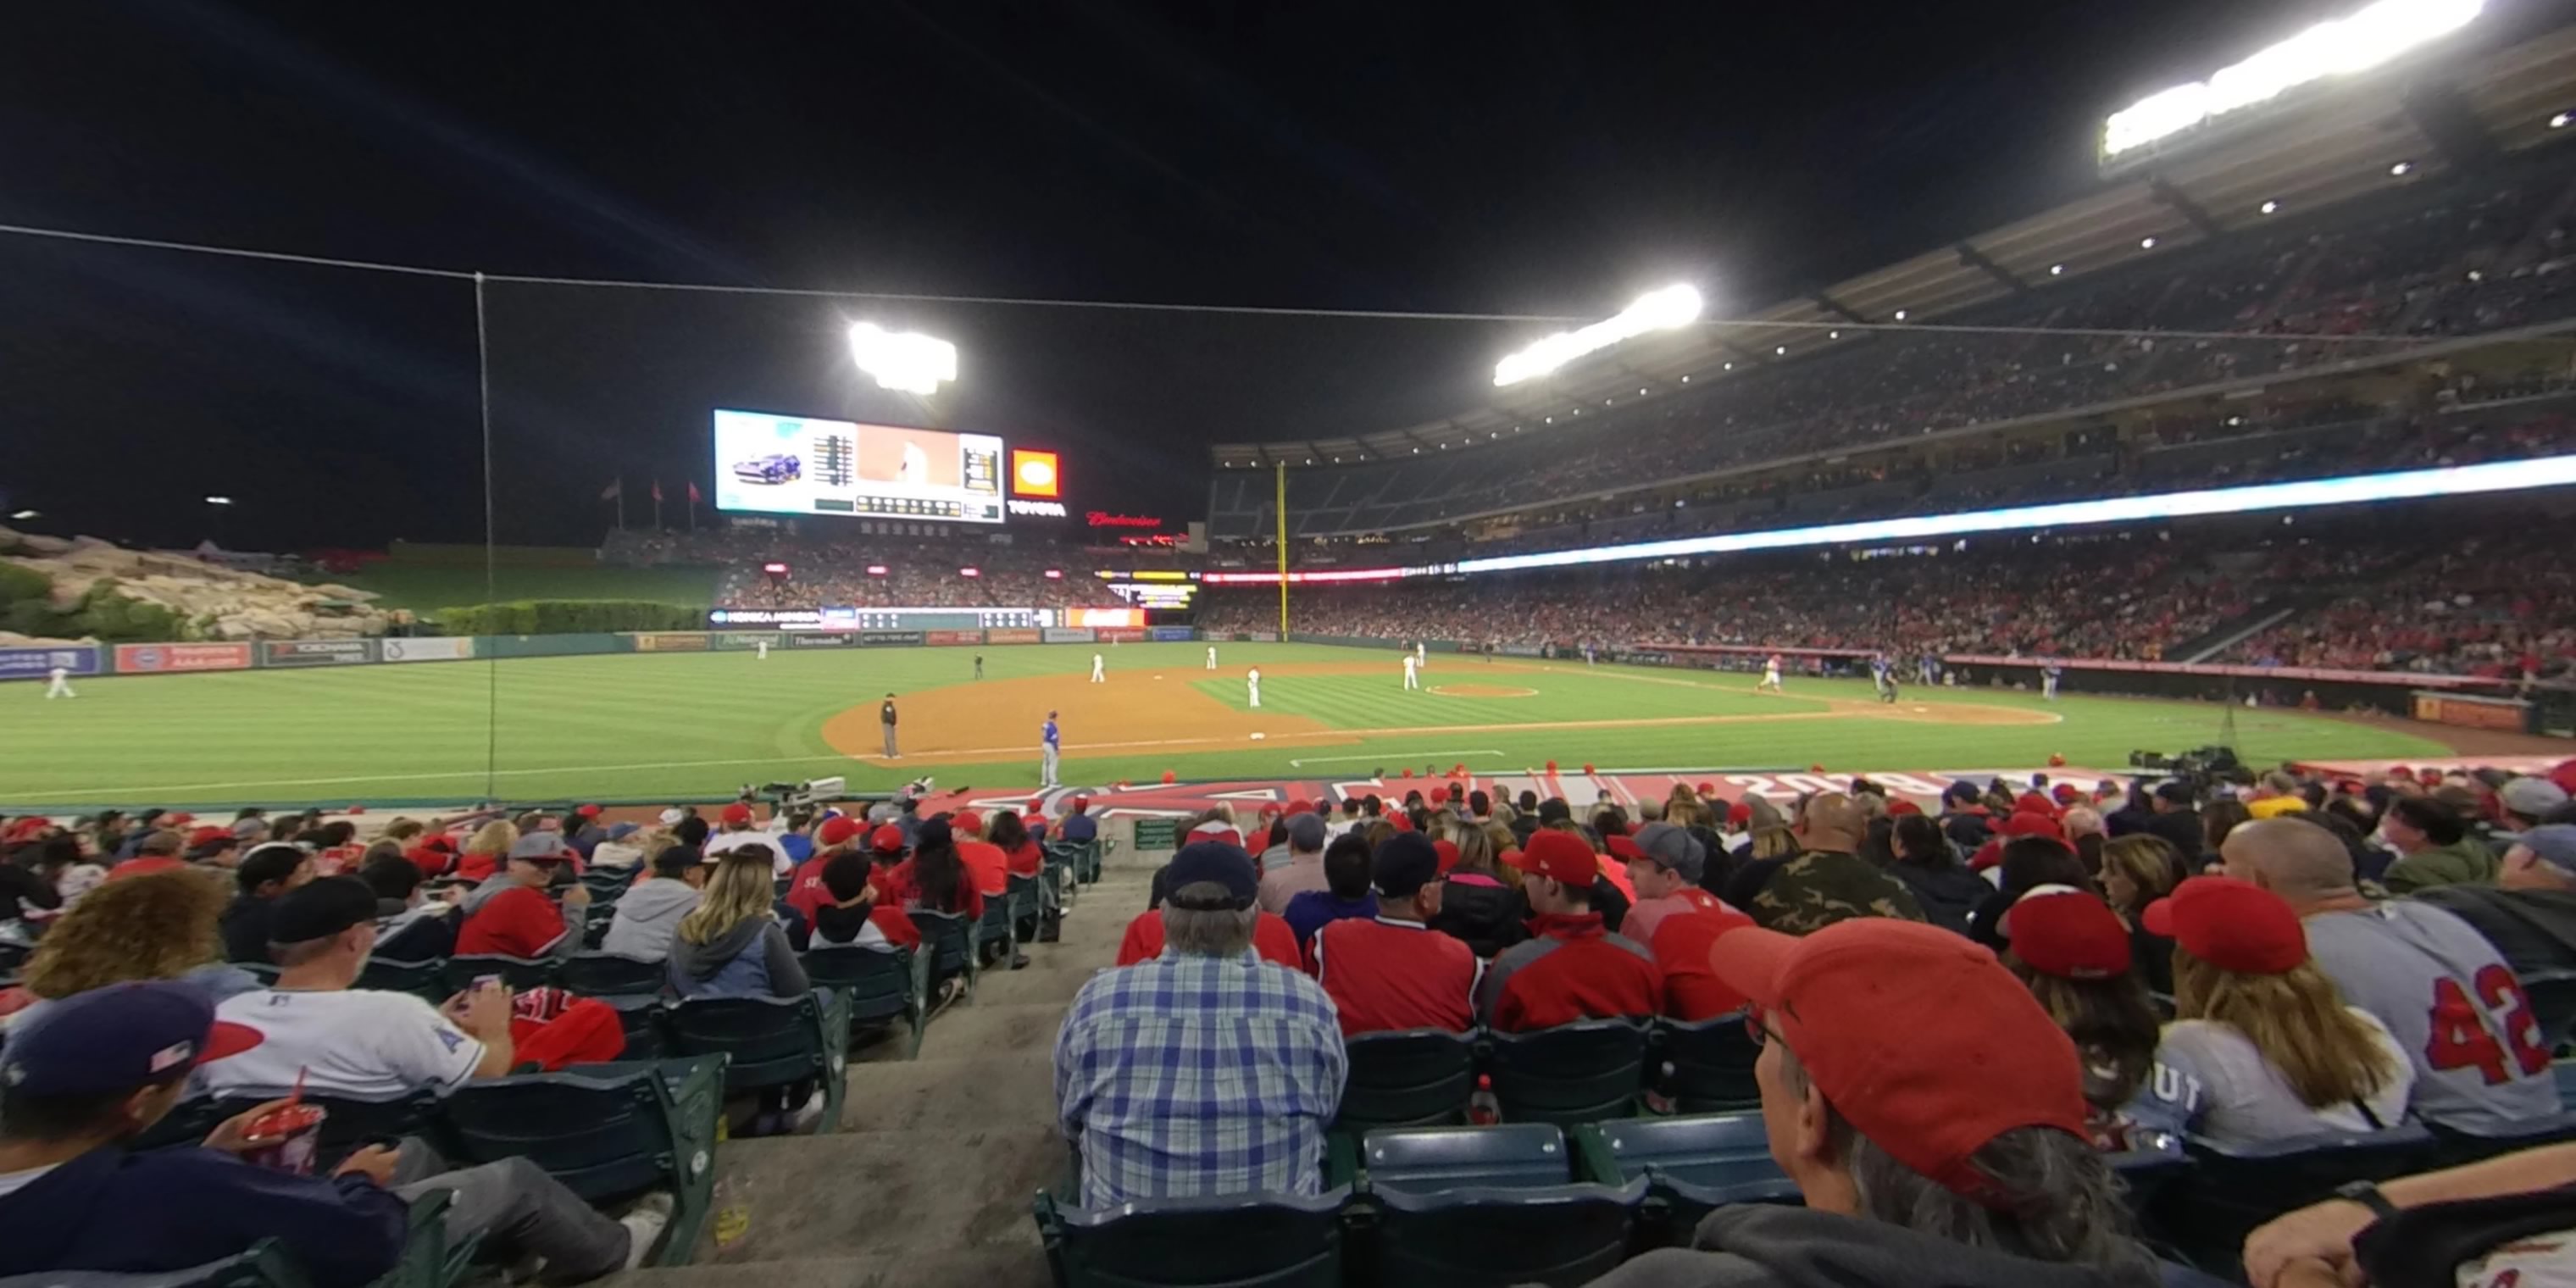 Angel Stadium Seating Chart With Rows And Seat Numbers Matttroy